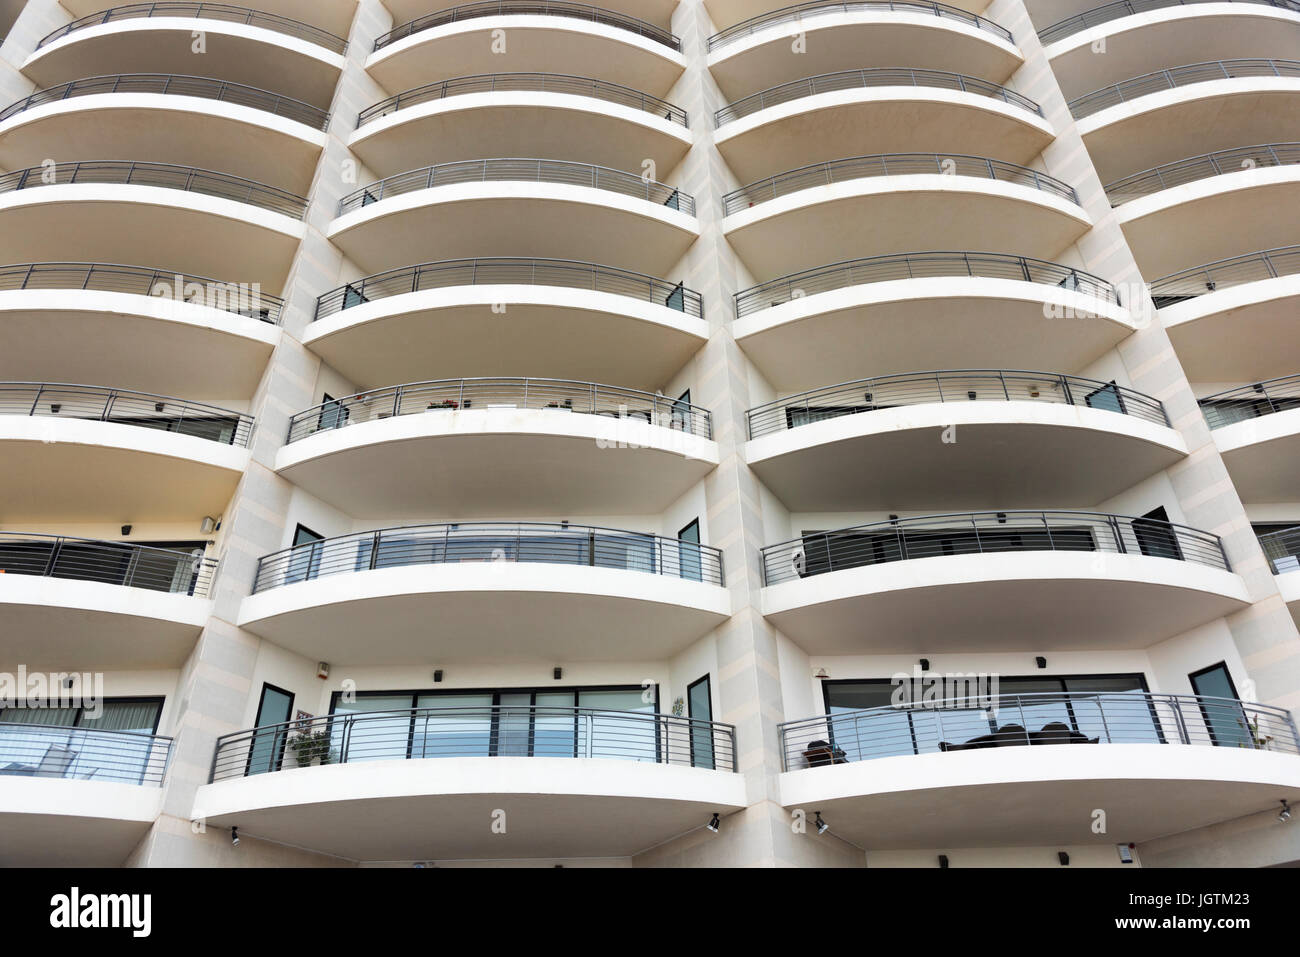 An abstract pattern of concrete balconies on an apartment building in St Julians Bay Malta - modern architecture Stock Photo